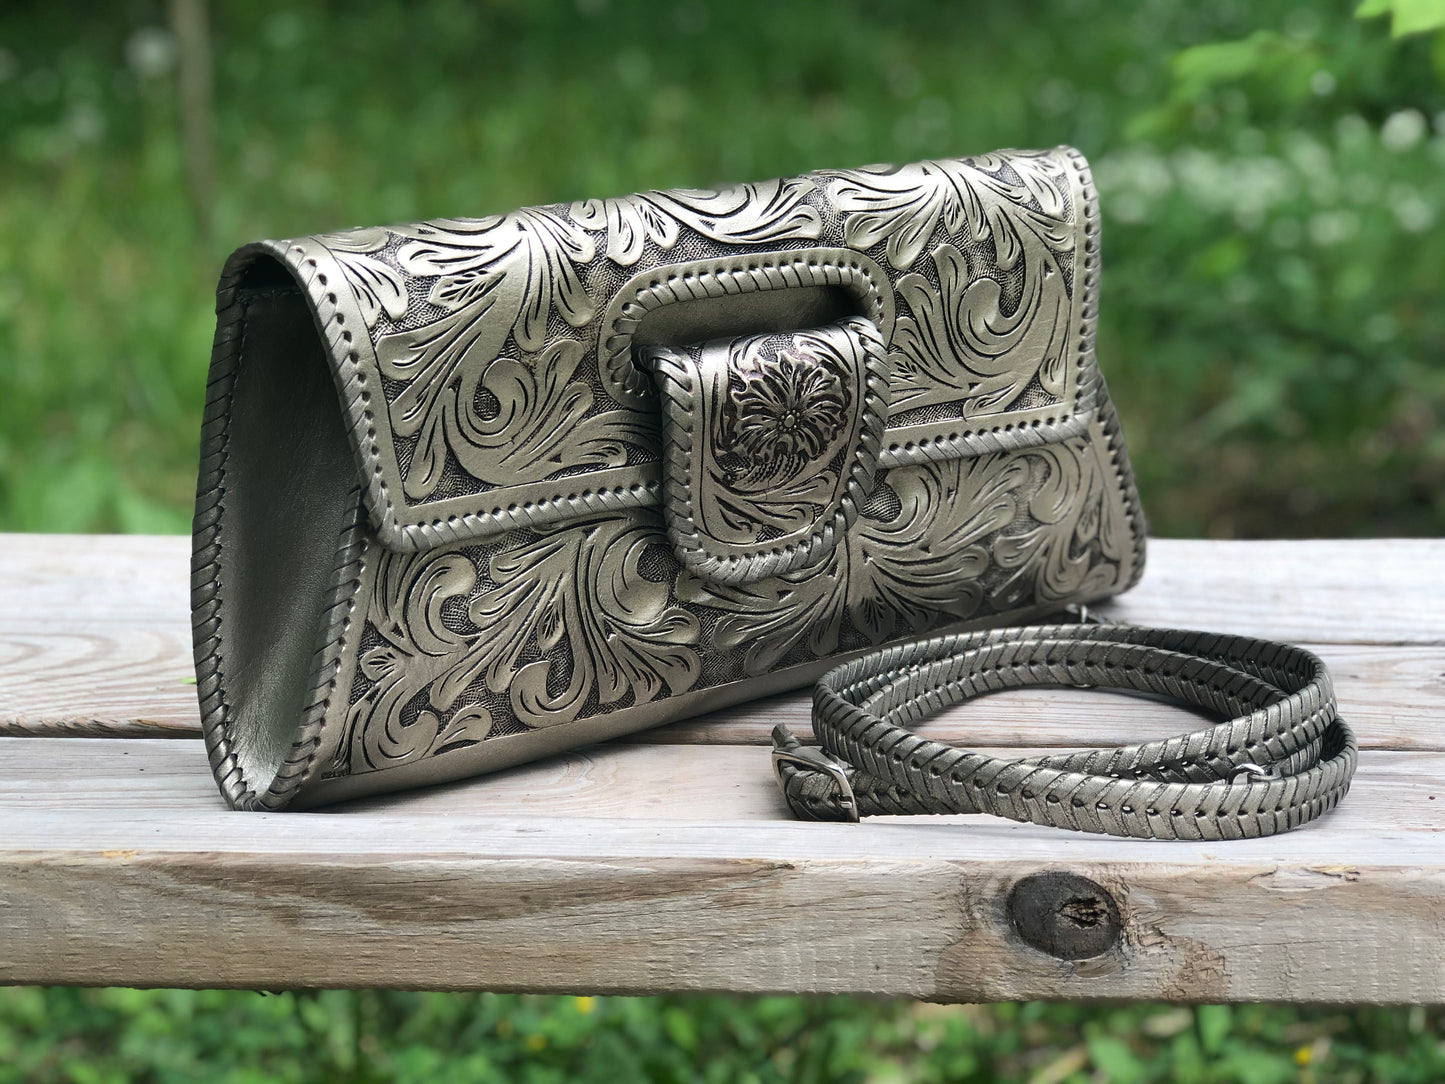 Hand-Tooled Leather Large Crossbody Clutch "Lengueta" by ALLE - ALLE Handbags